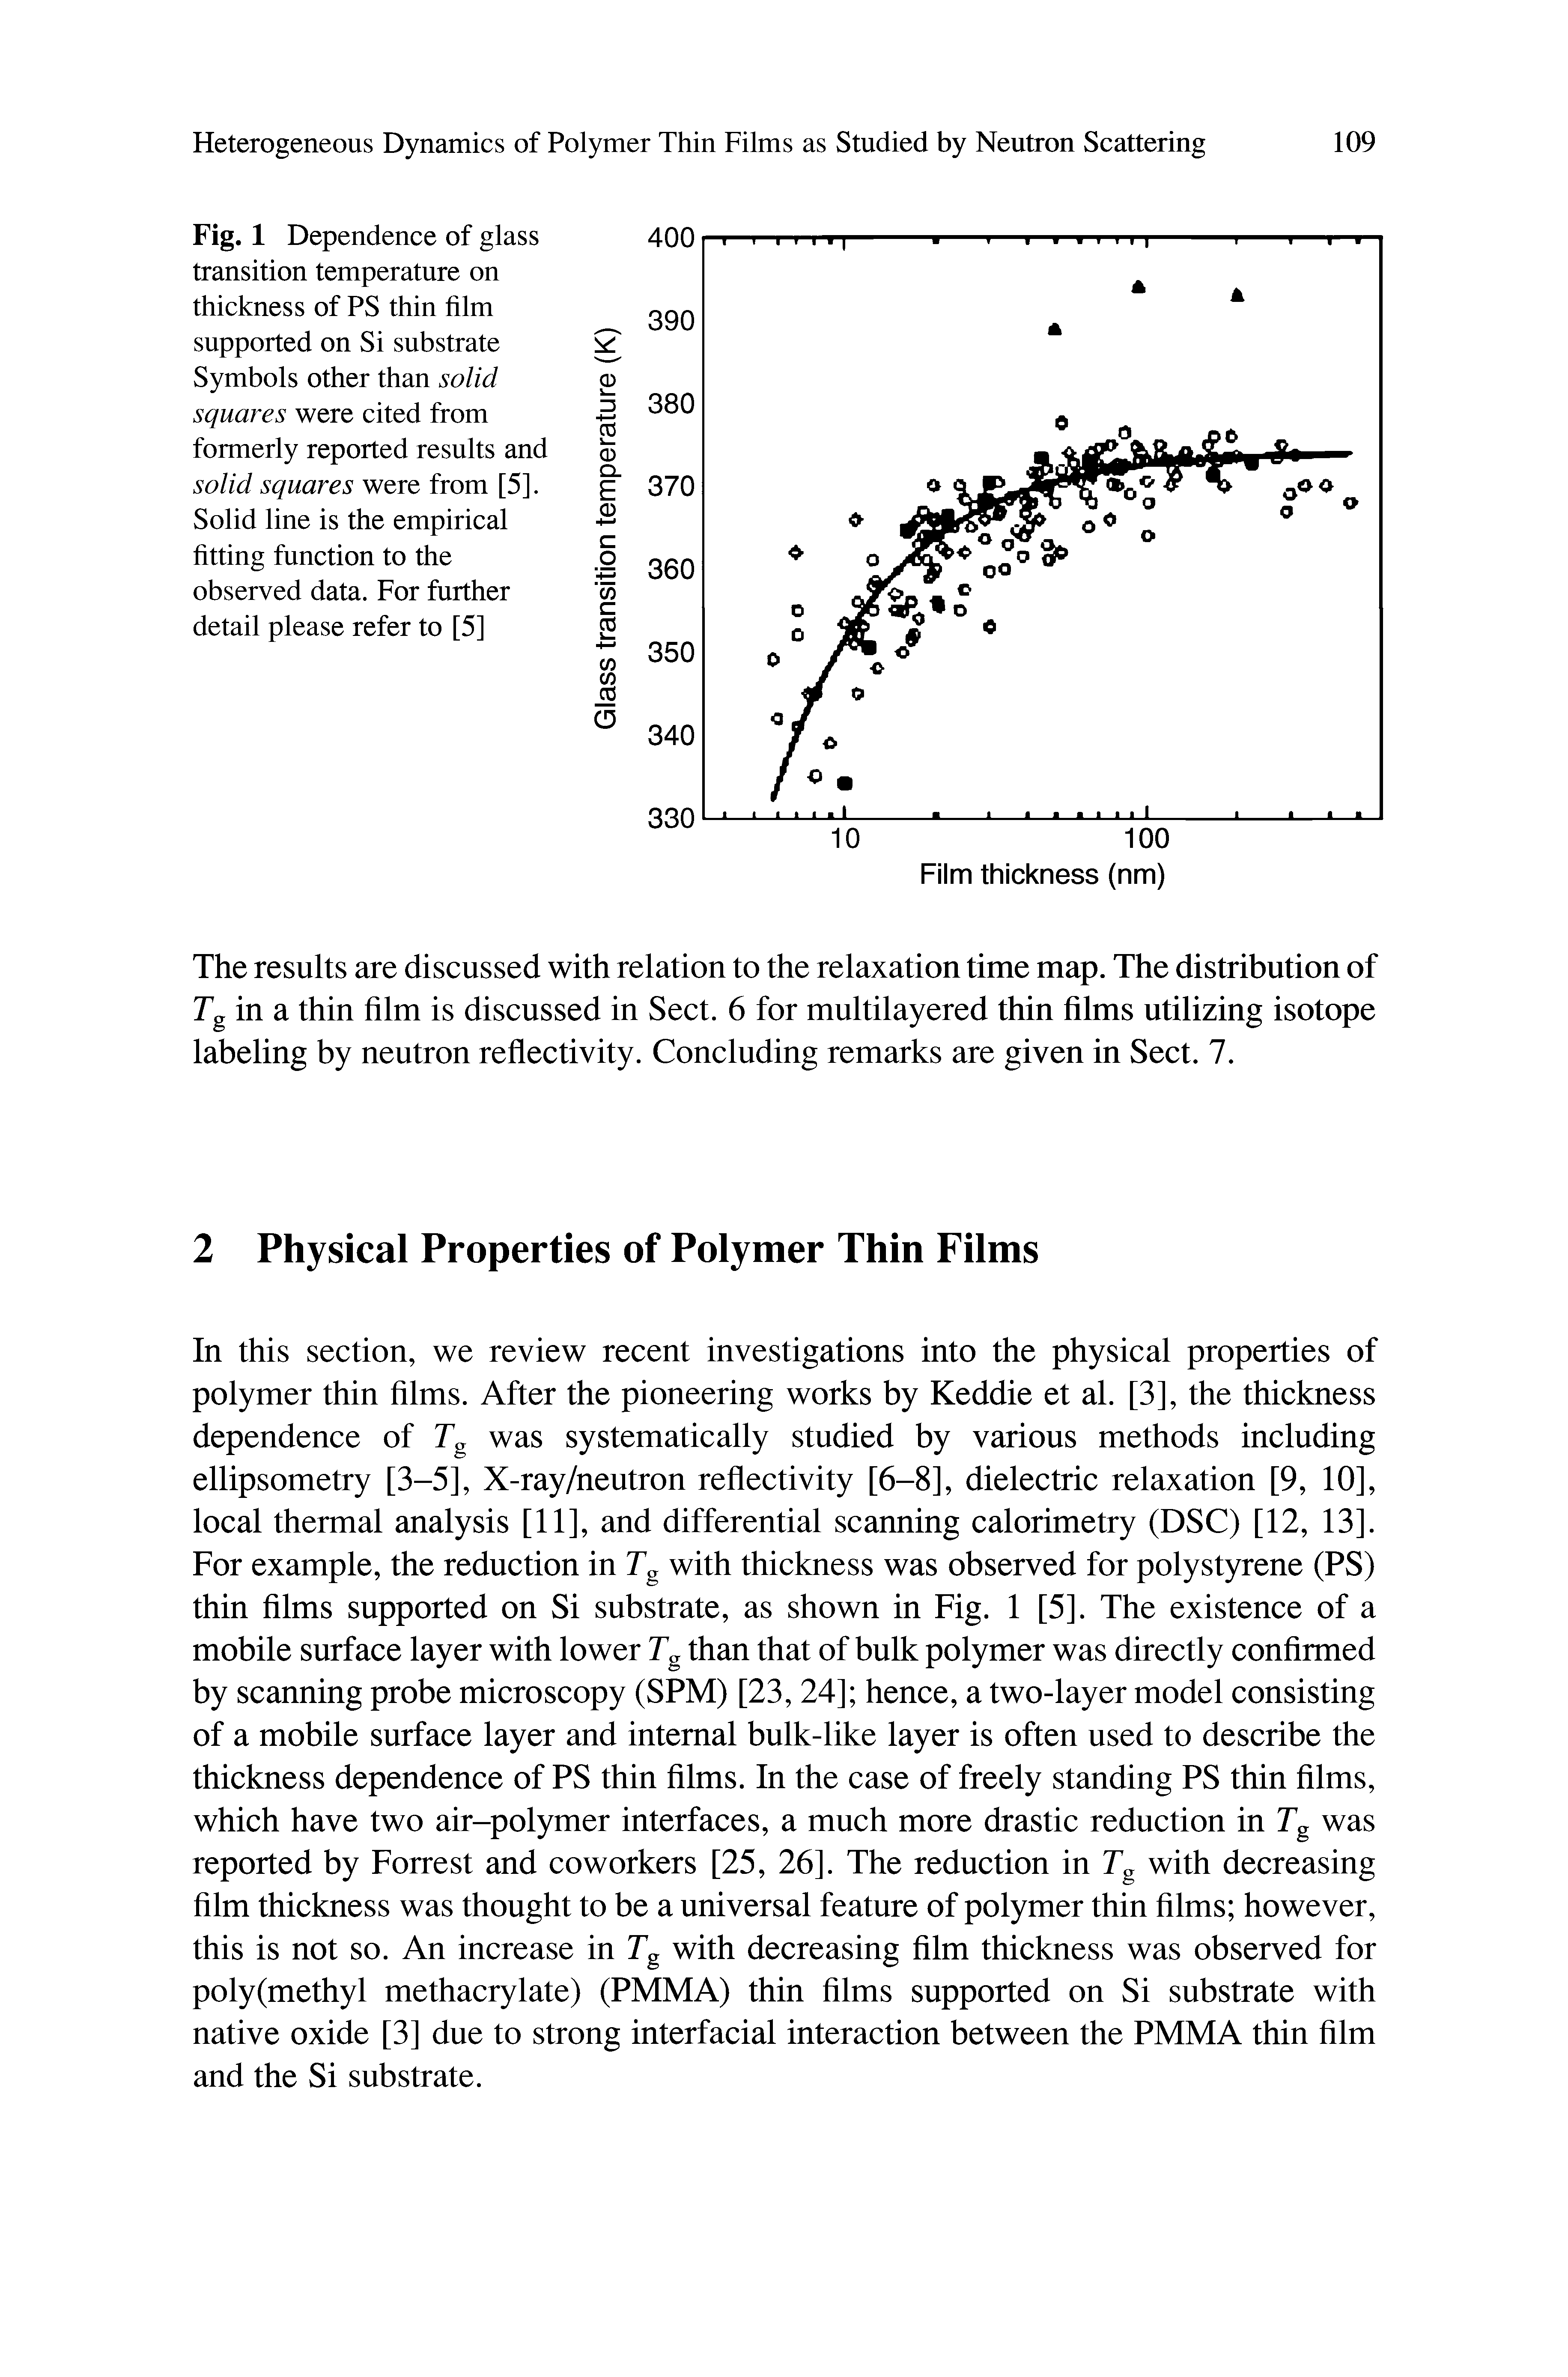 Fig. 1 Dependence of glass transition temperature on thickness of PS thin film supported on Si substrate Symbols other than solid squares were cited from formerly reported results and solid squares were from [5]. Solid line is the empirical fitting function to the observed data. For further detail please refer to [5]...